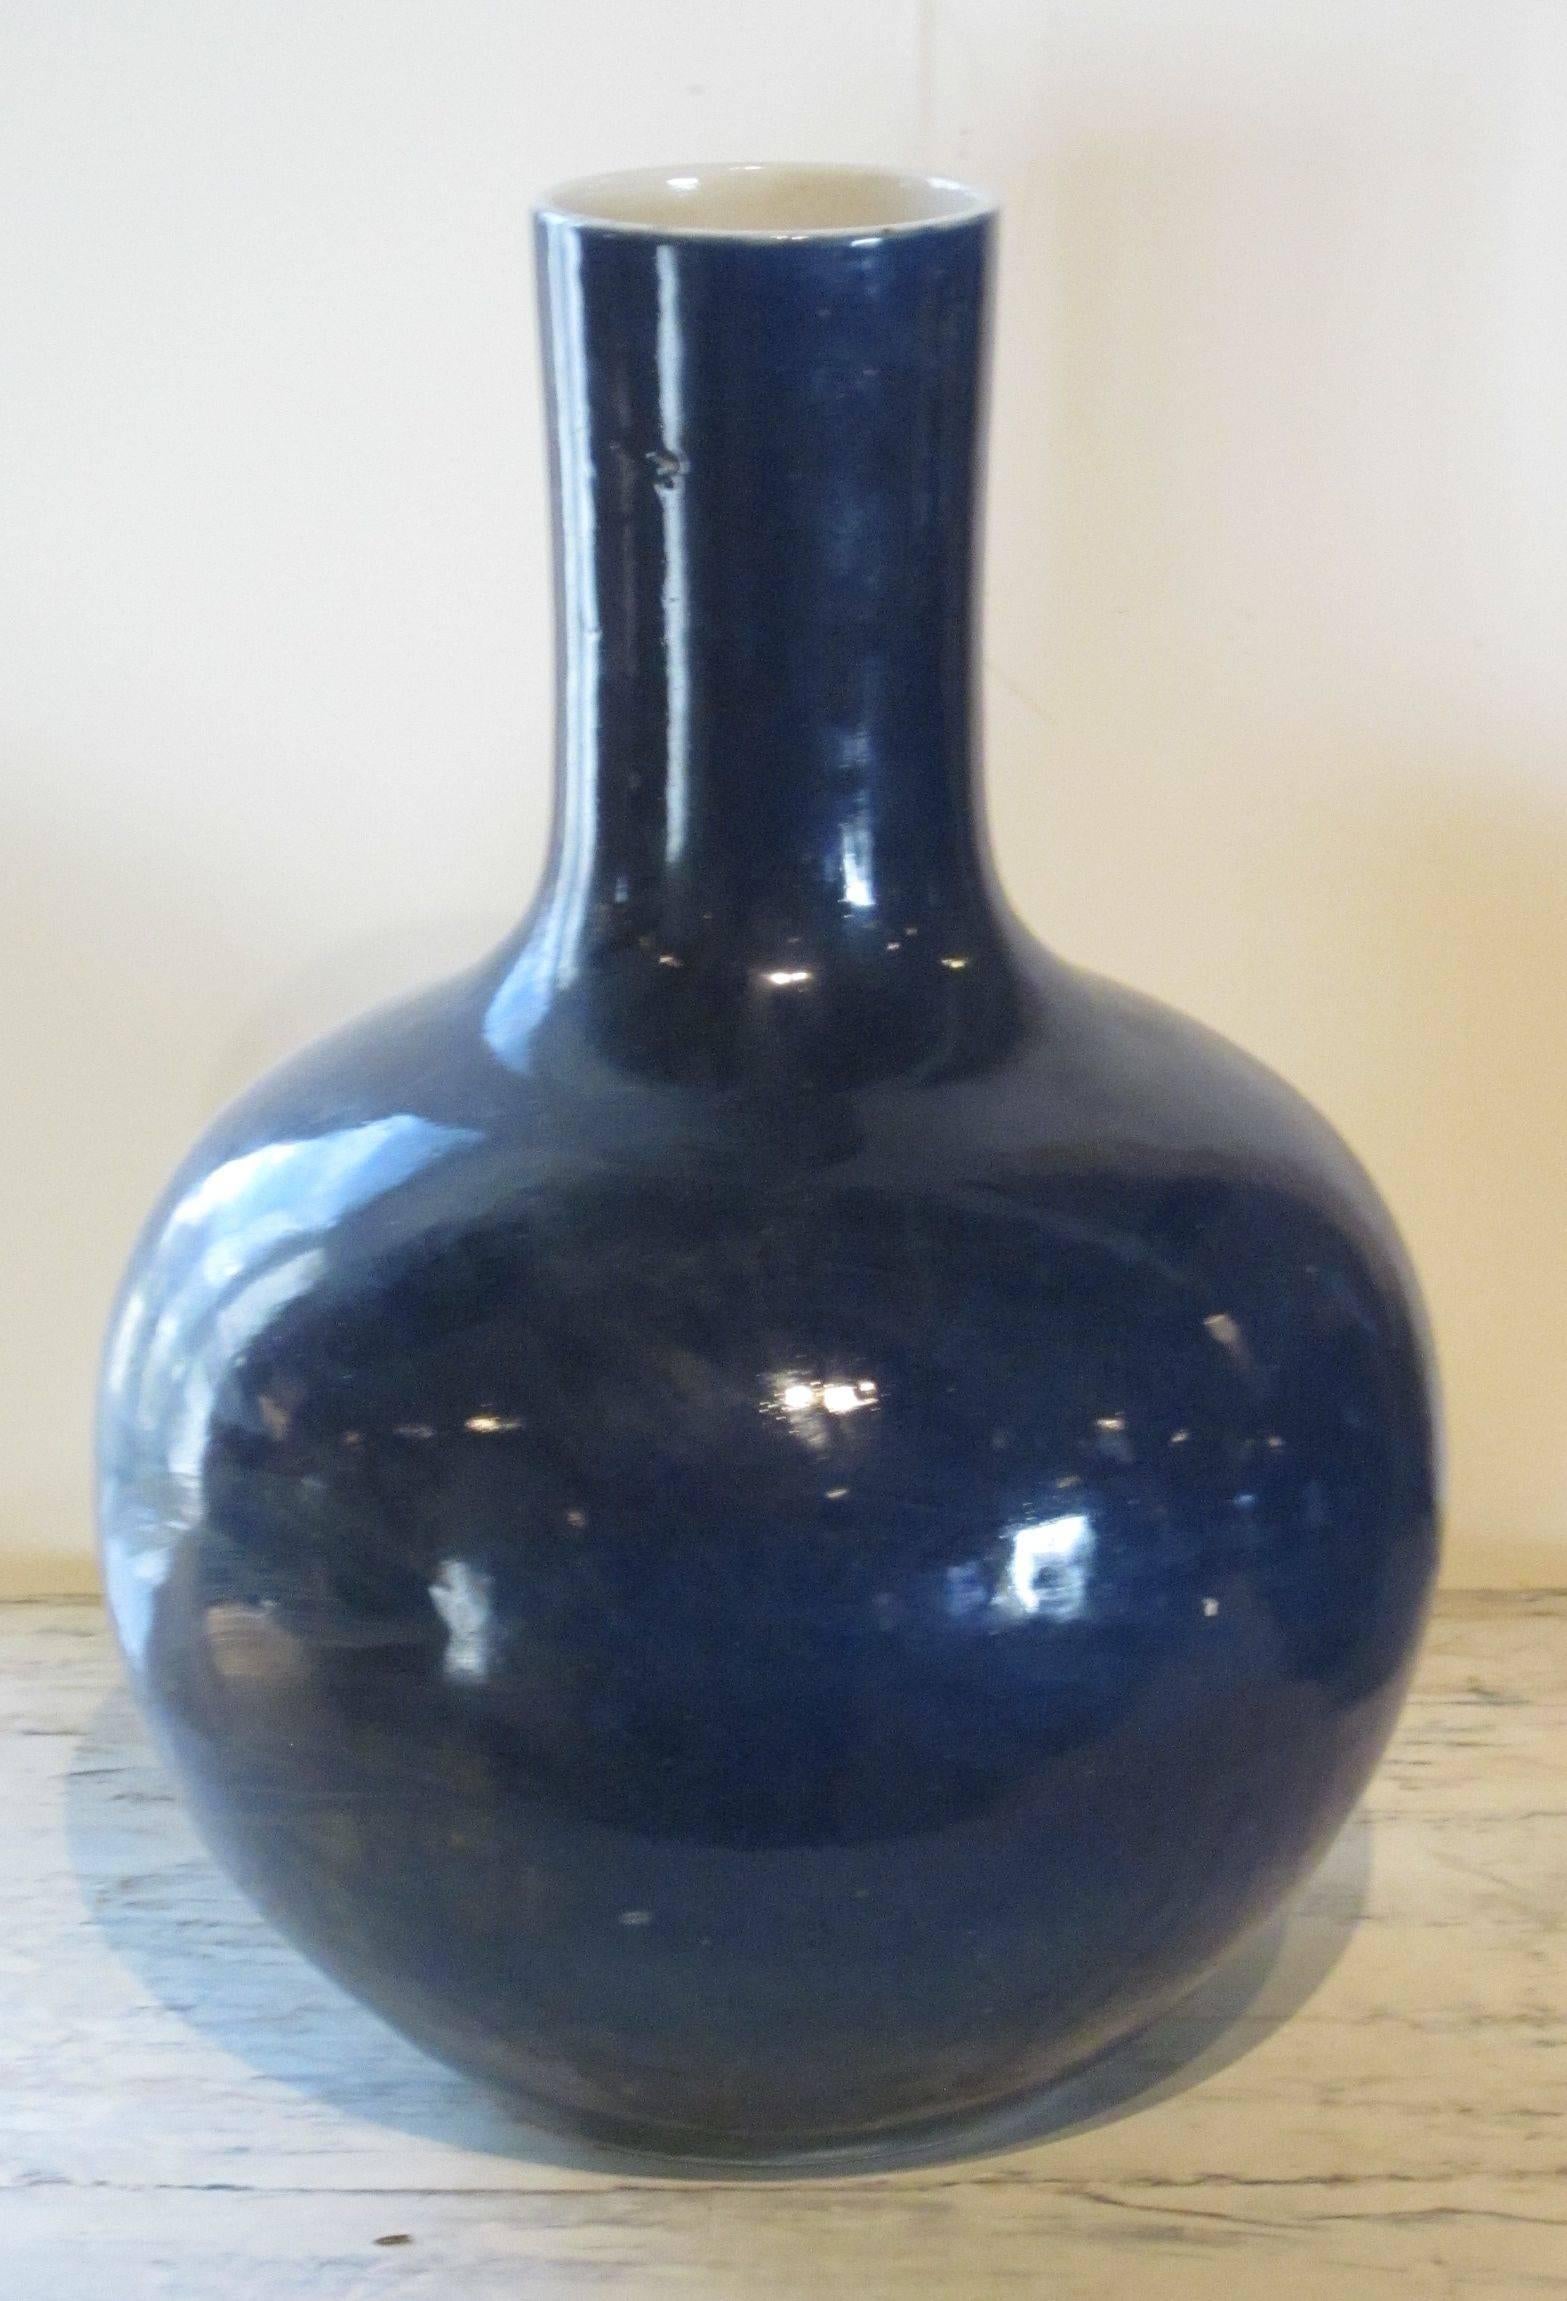 Contemporary Chinese sapphire blue bulbous shape ceramic vase.
Beautiful shade of sapphire with white interior.
Two are available and sold individually.

 